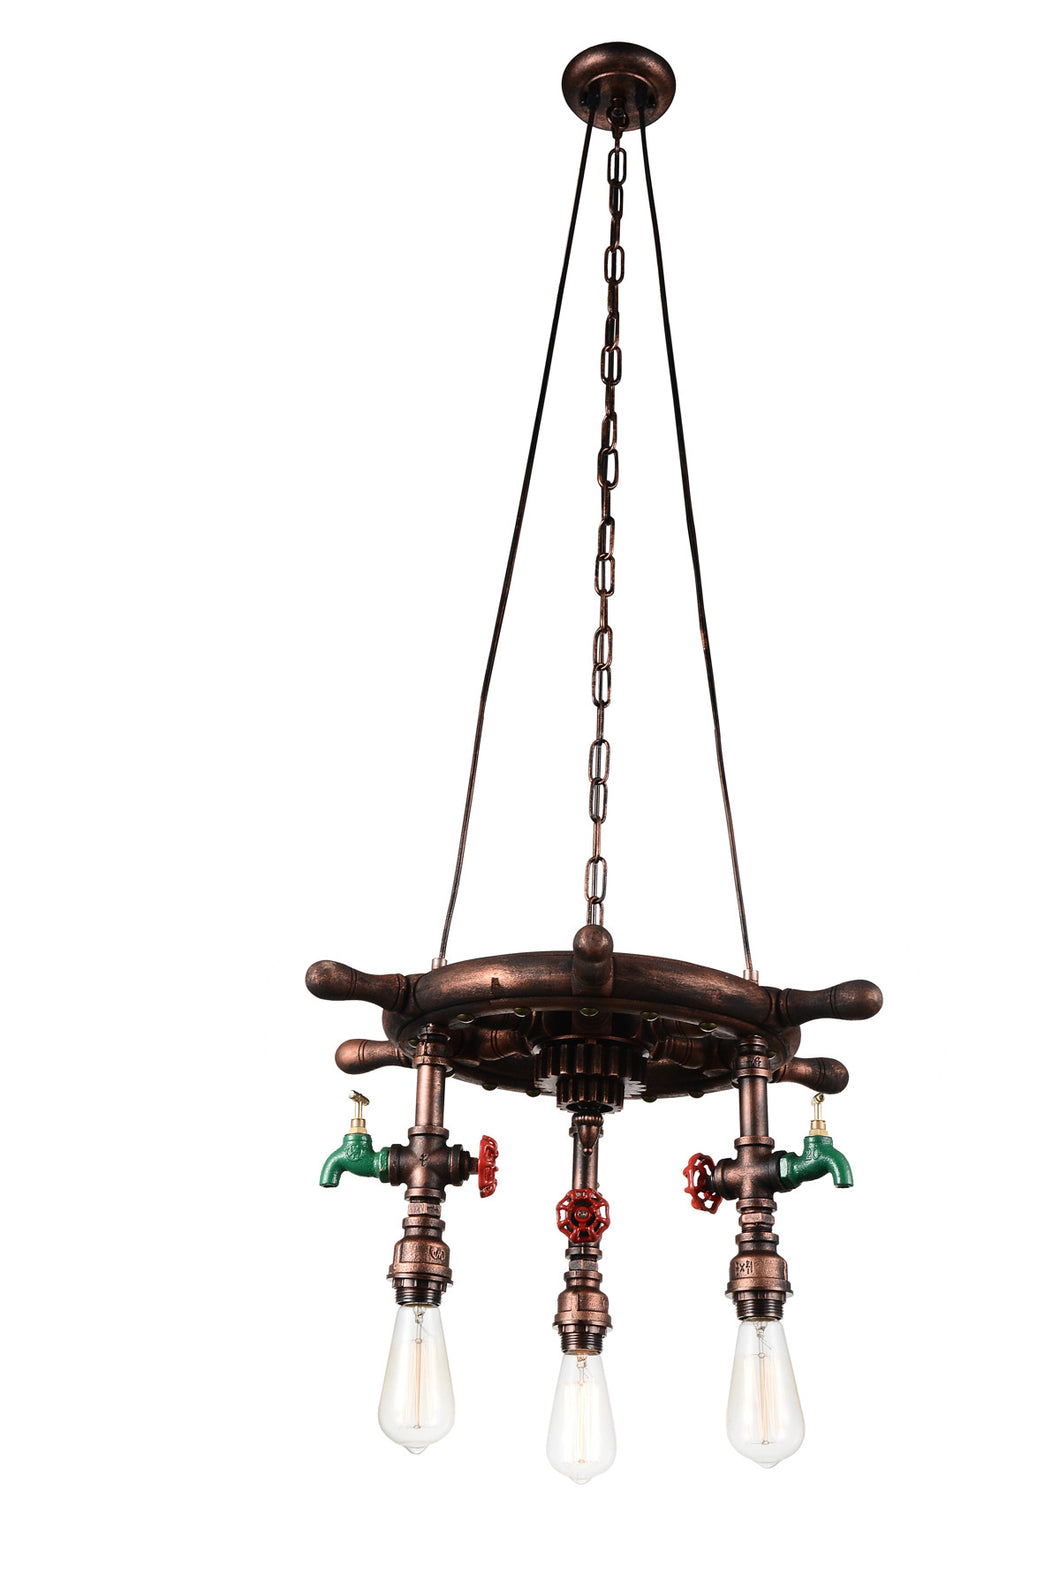 3 Light Down Chandelier with Speckled copper finish